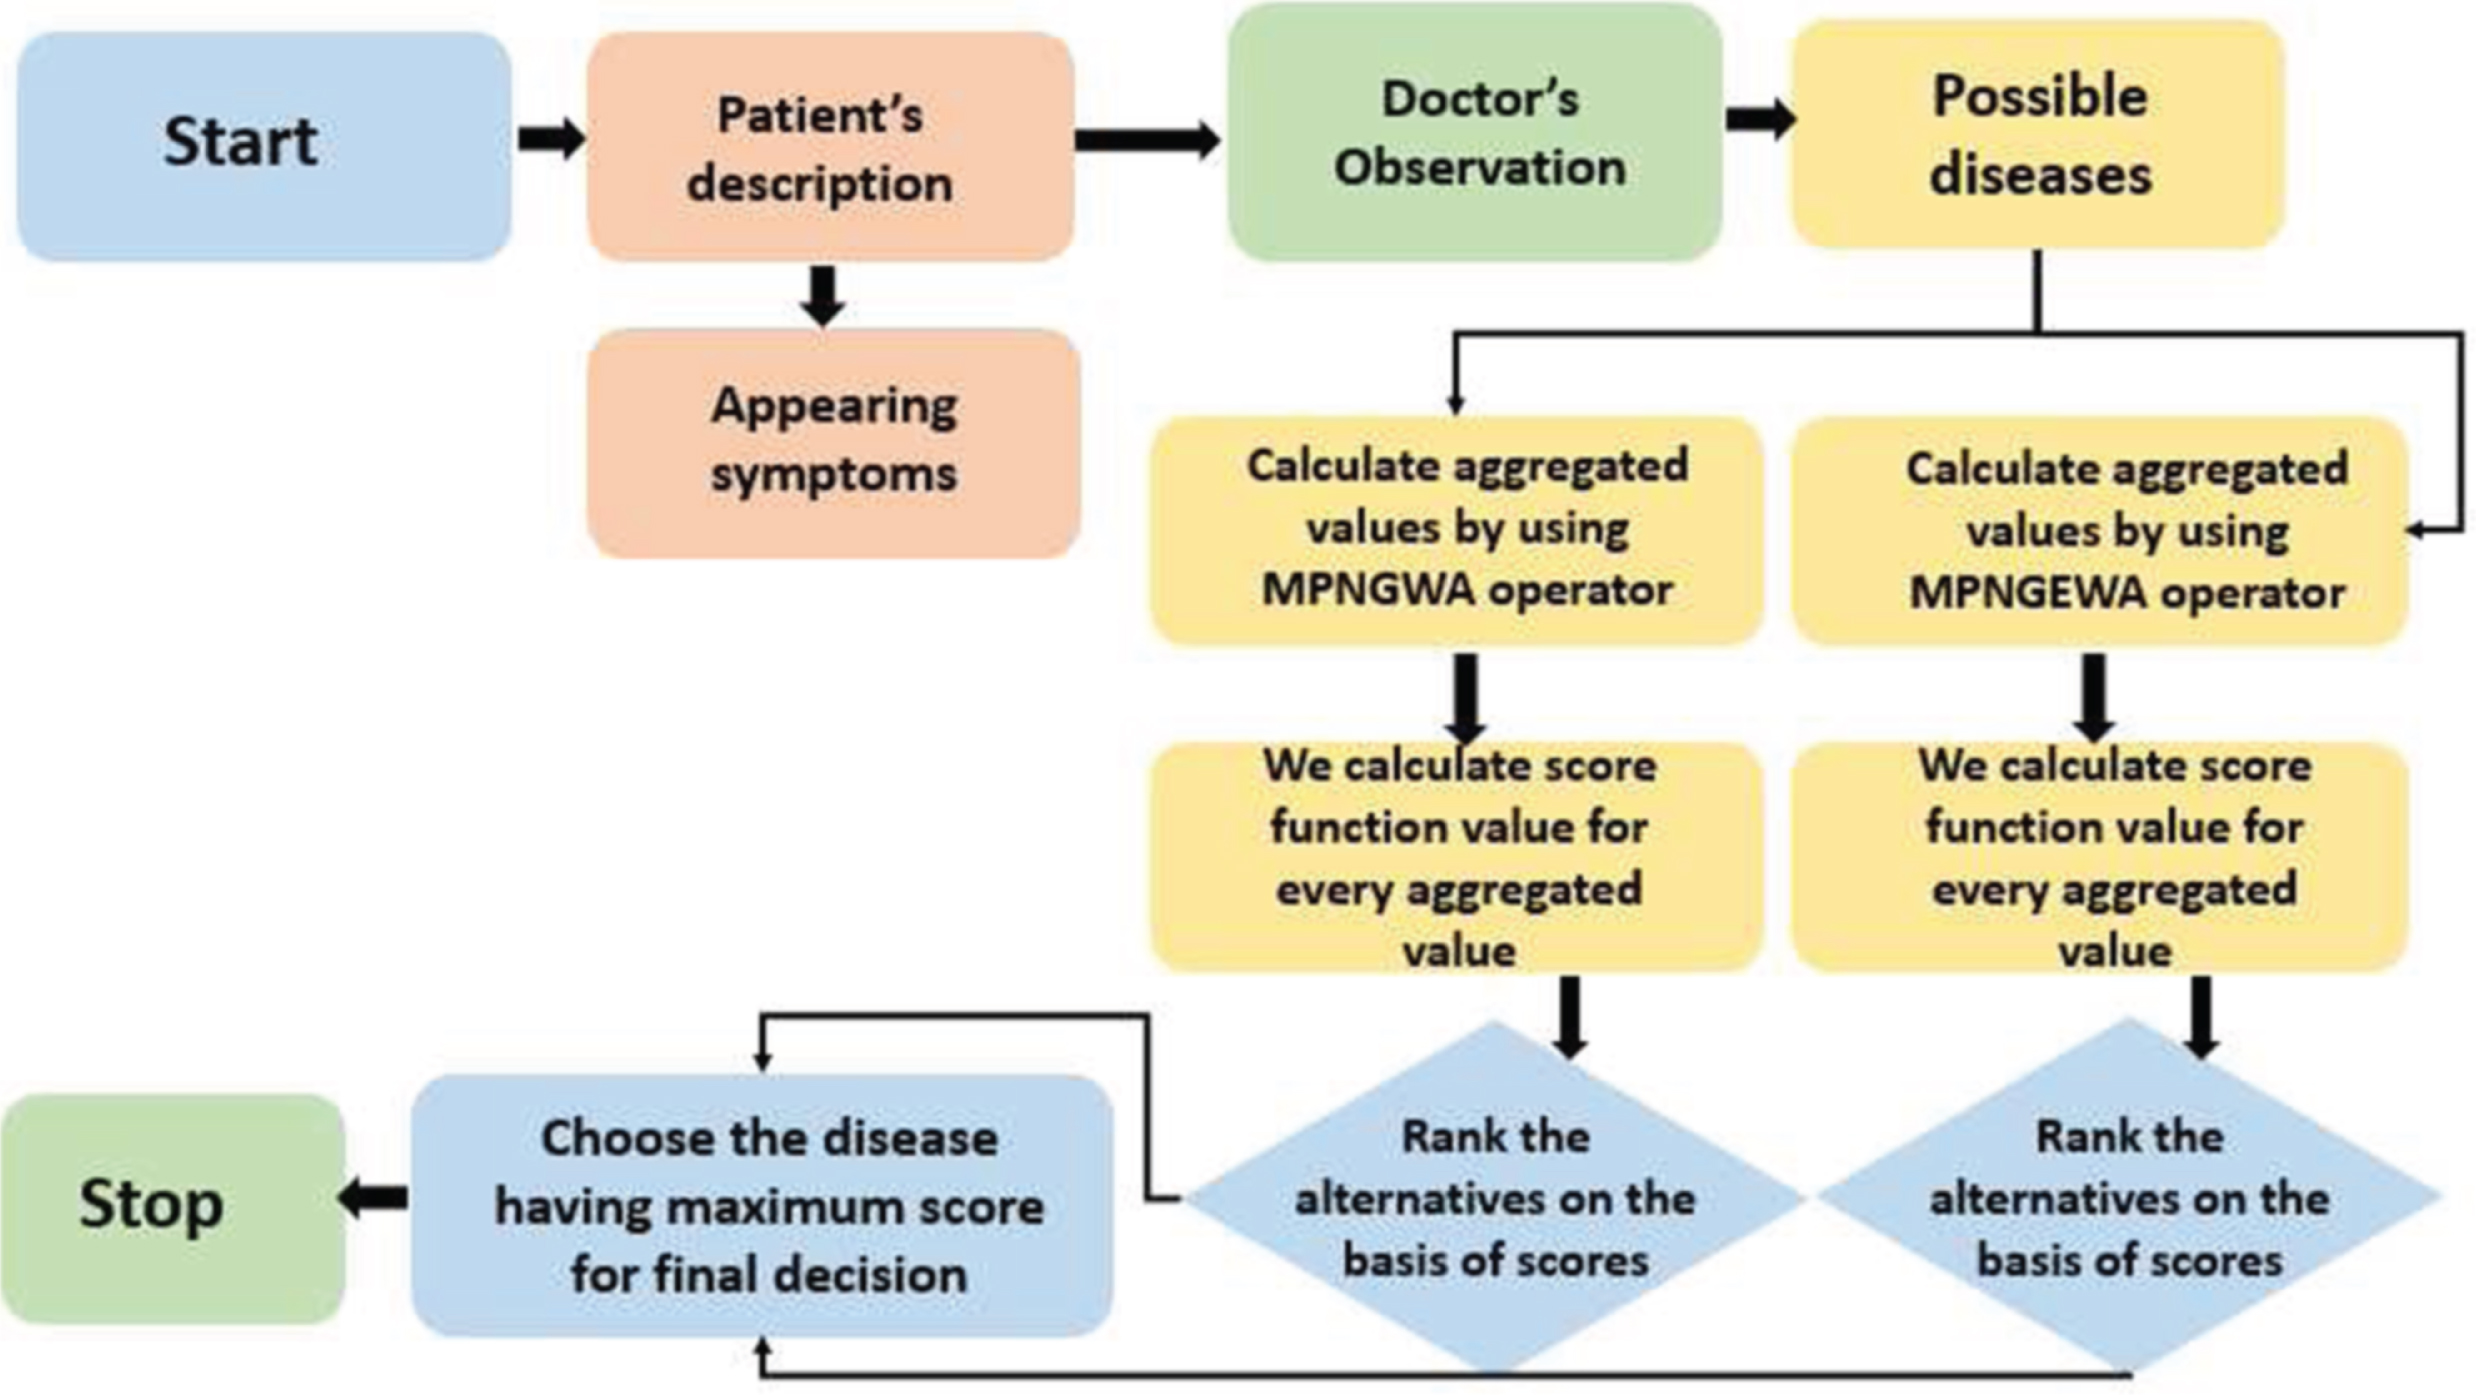 Flow chart diagram of proposed algorithms to diagnose COVID-19.